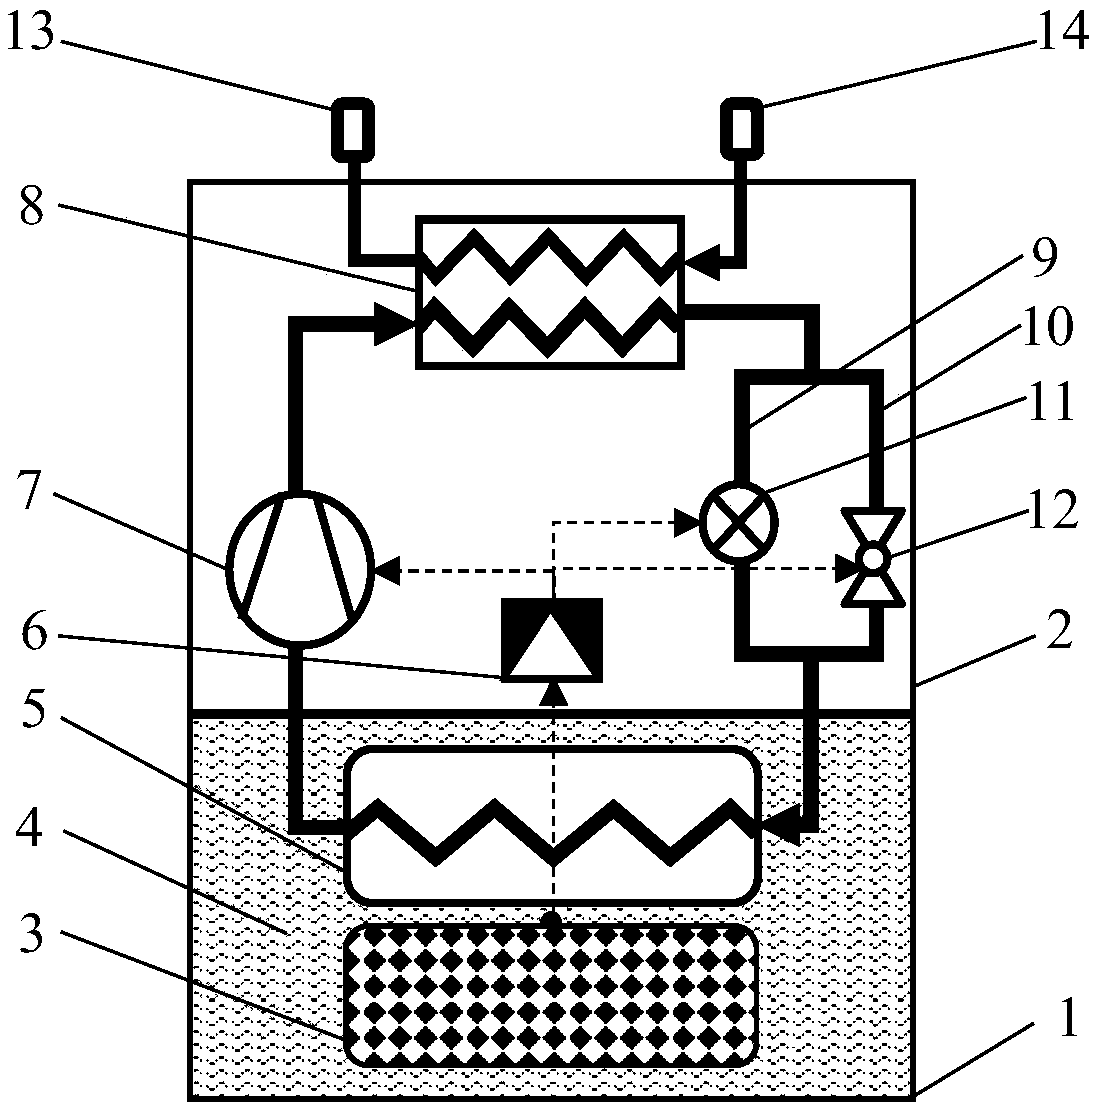 A modular composite high-energy weapon cooling system and its control method